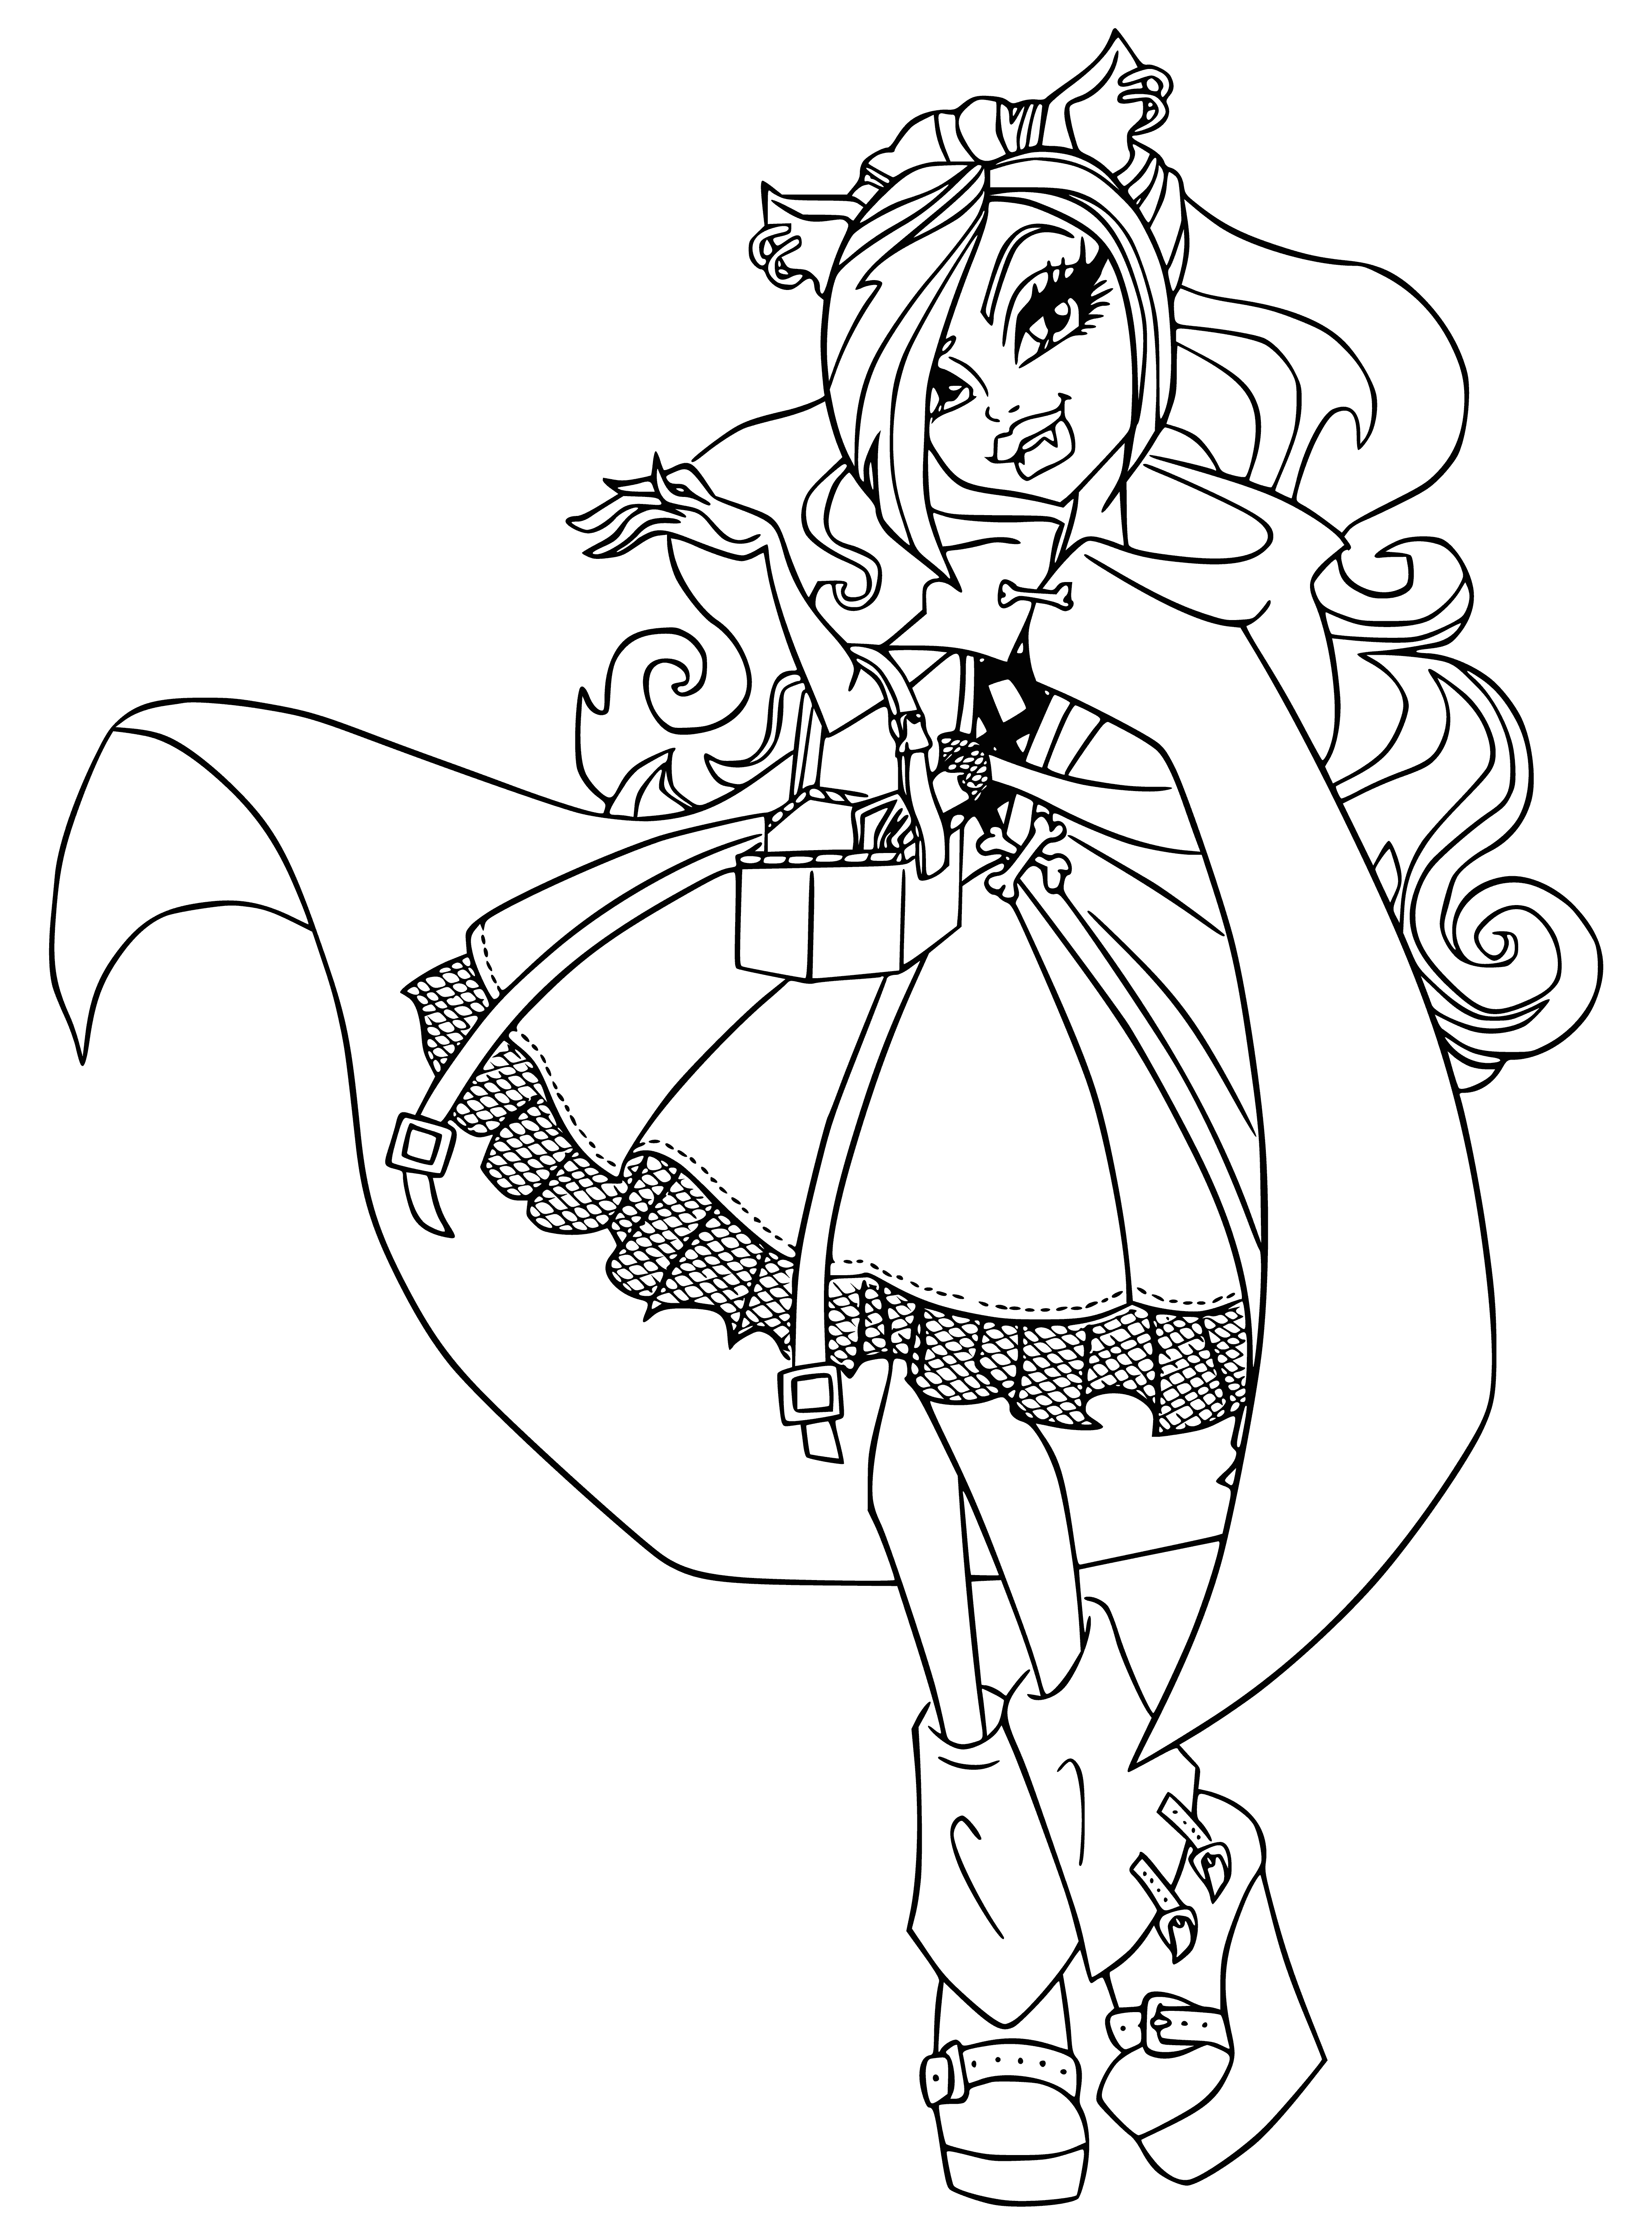 Claudine in a raincoat coloring page